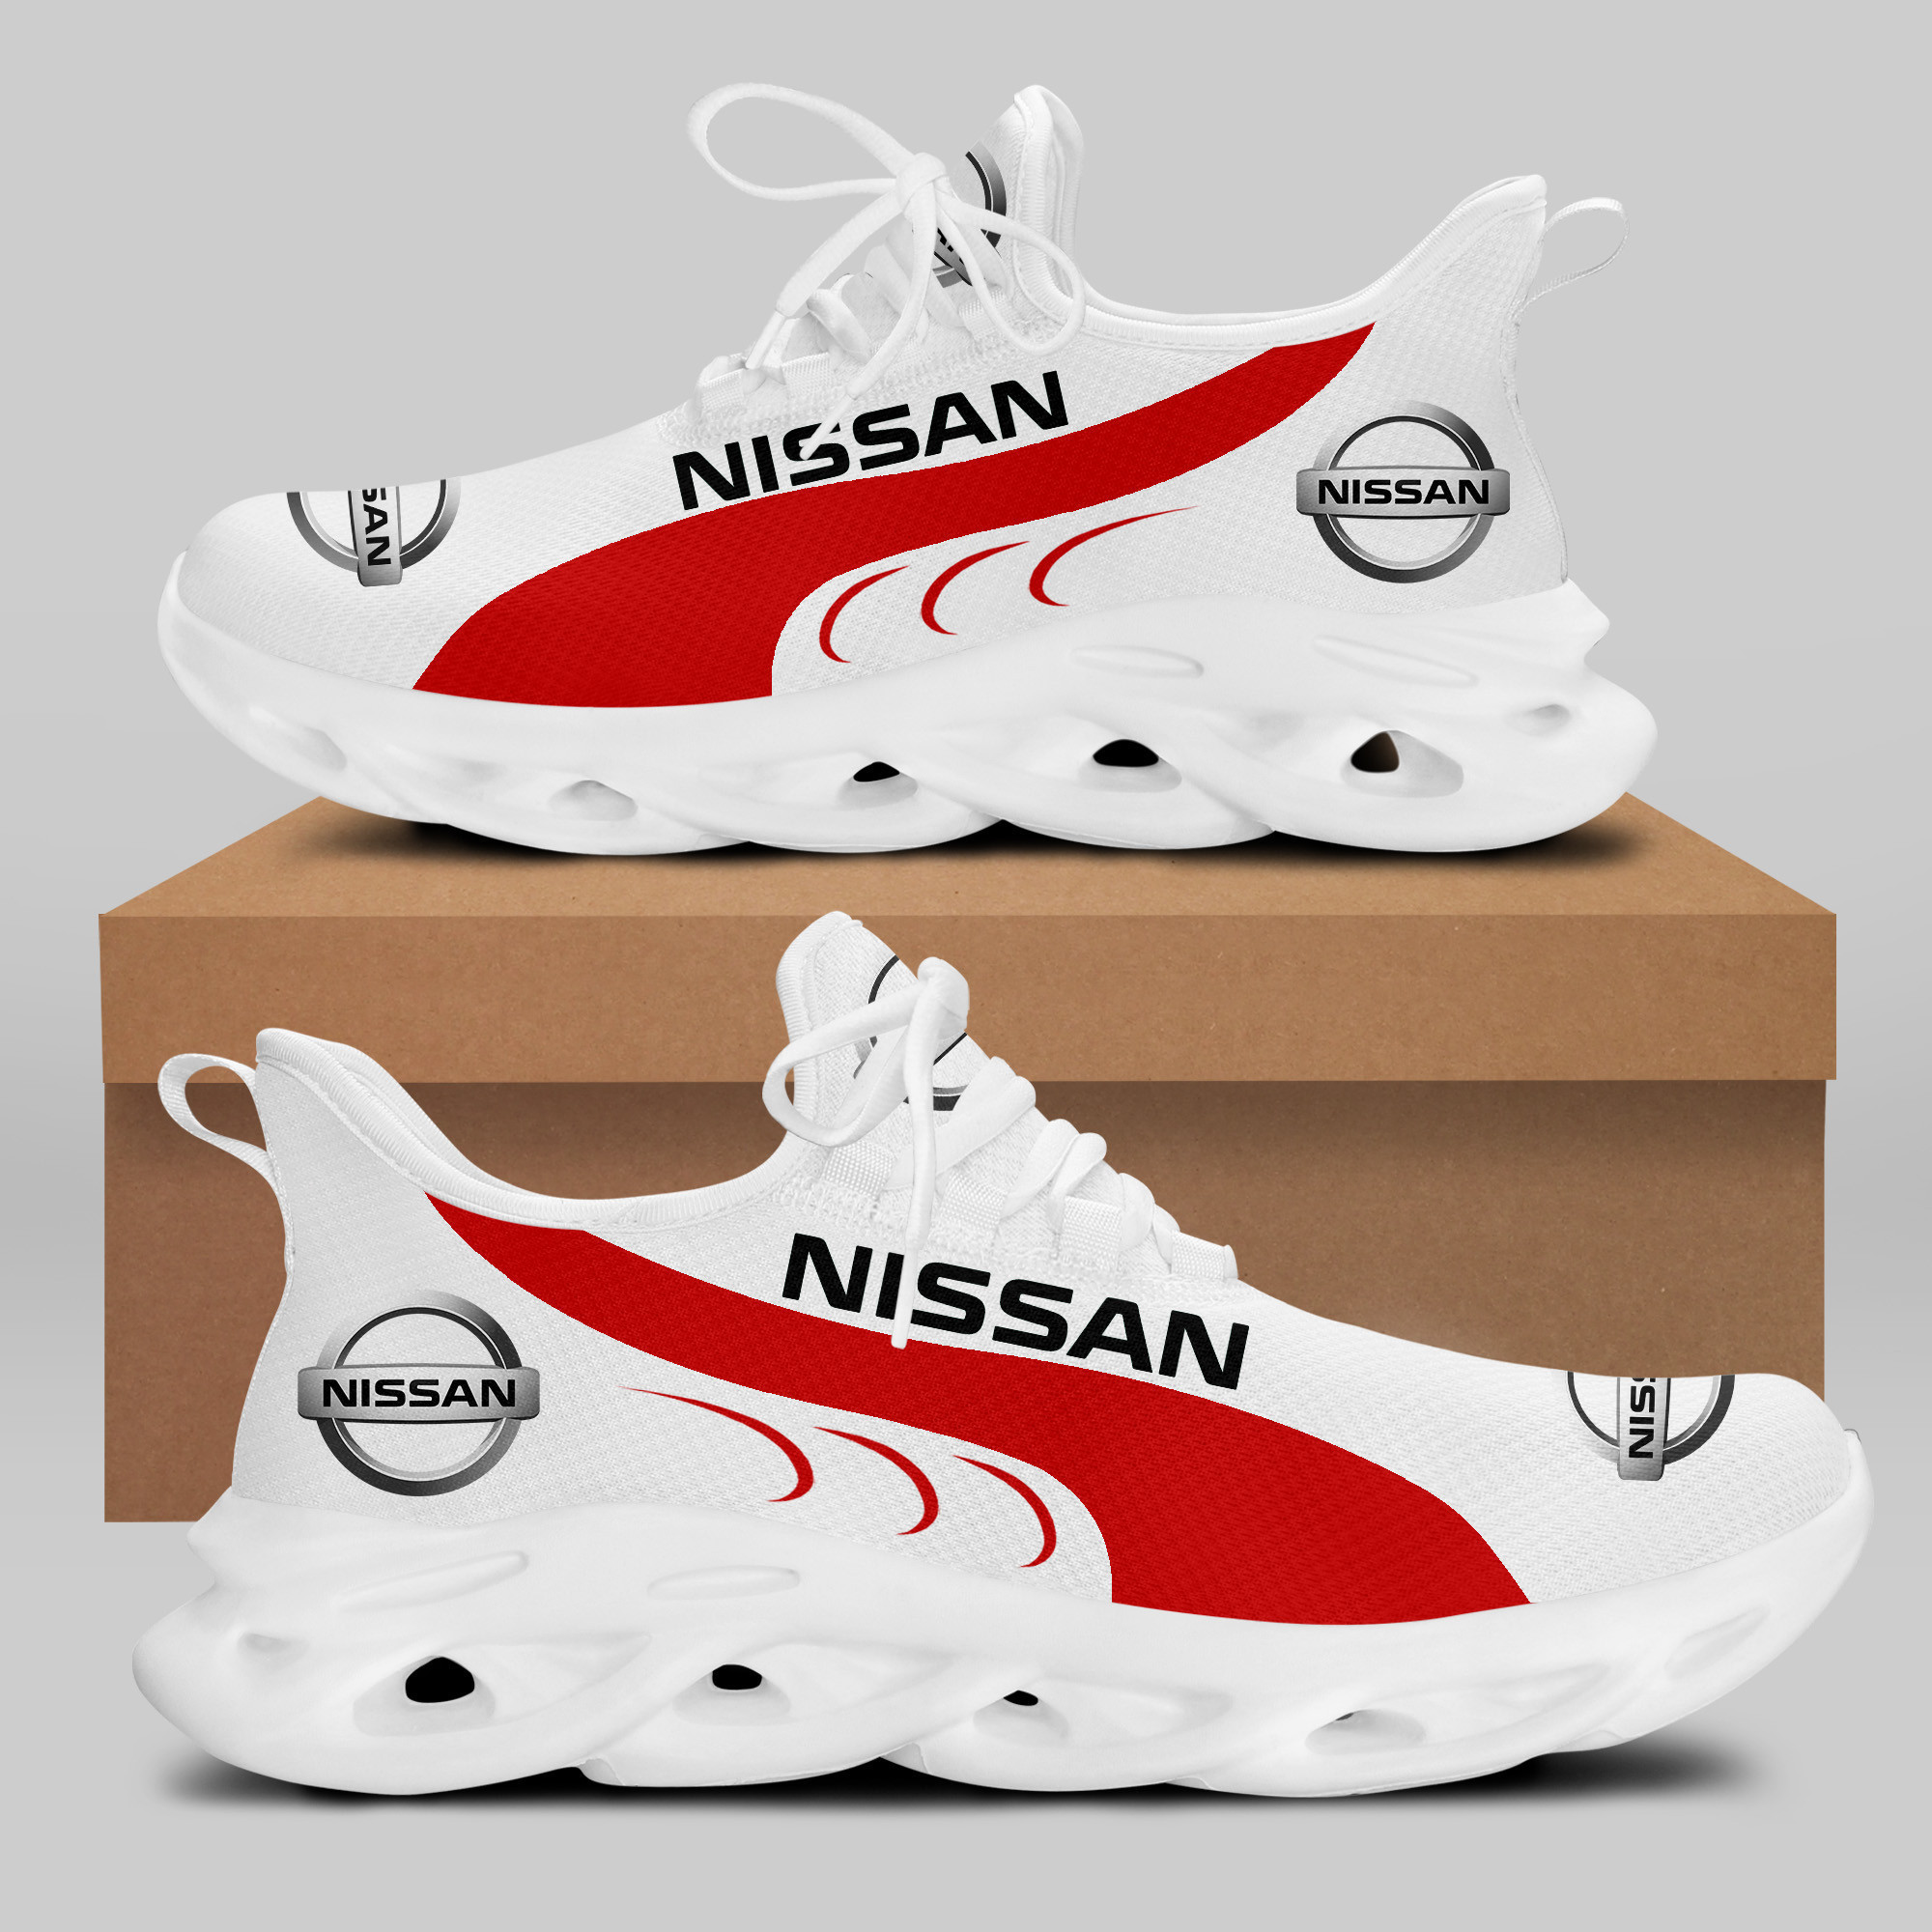 Nissan Running Shoes Ver 20